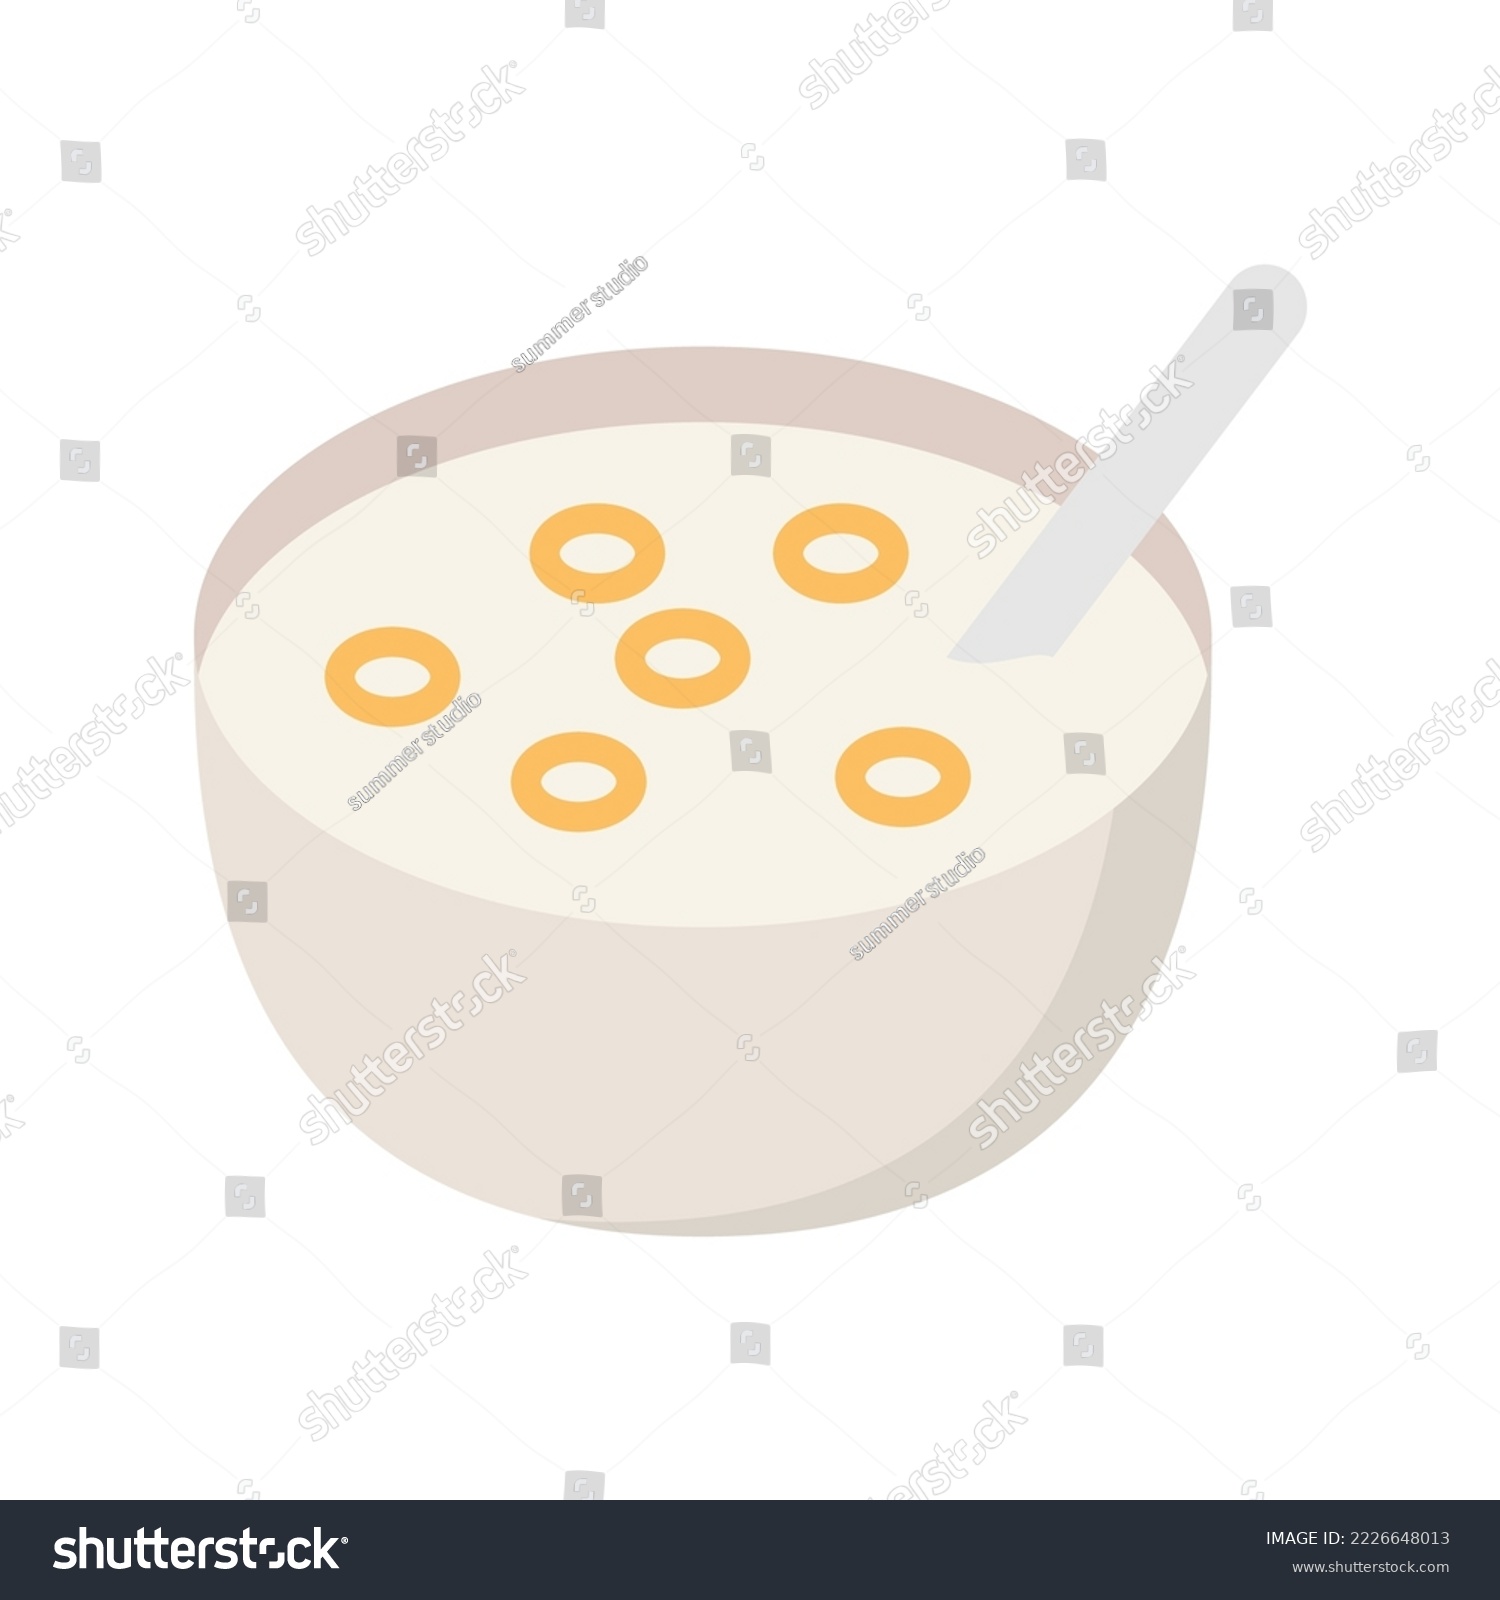 SVG of Bowl of ring cereals or cheerios with of milk. Healthy and wholesome breakfast. Vector illustration svg